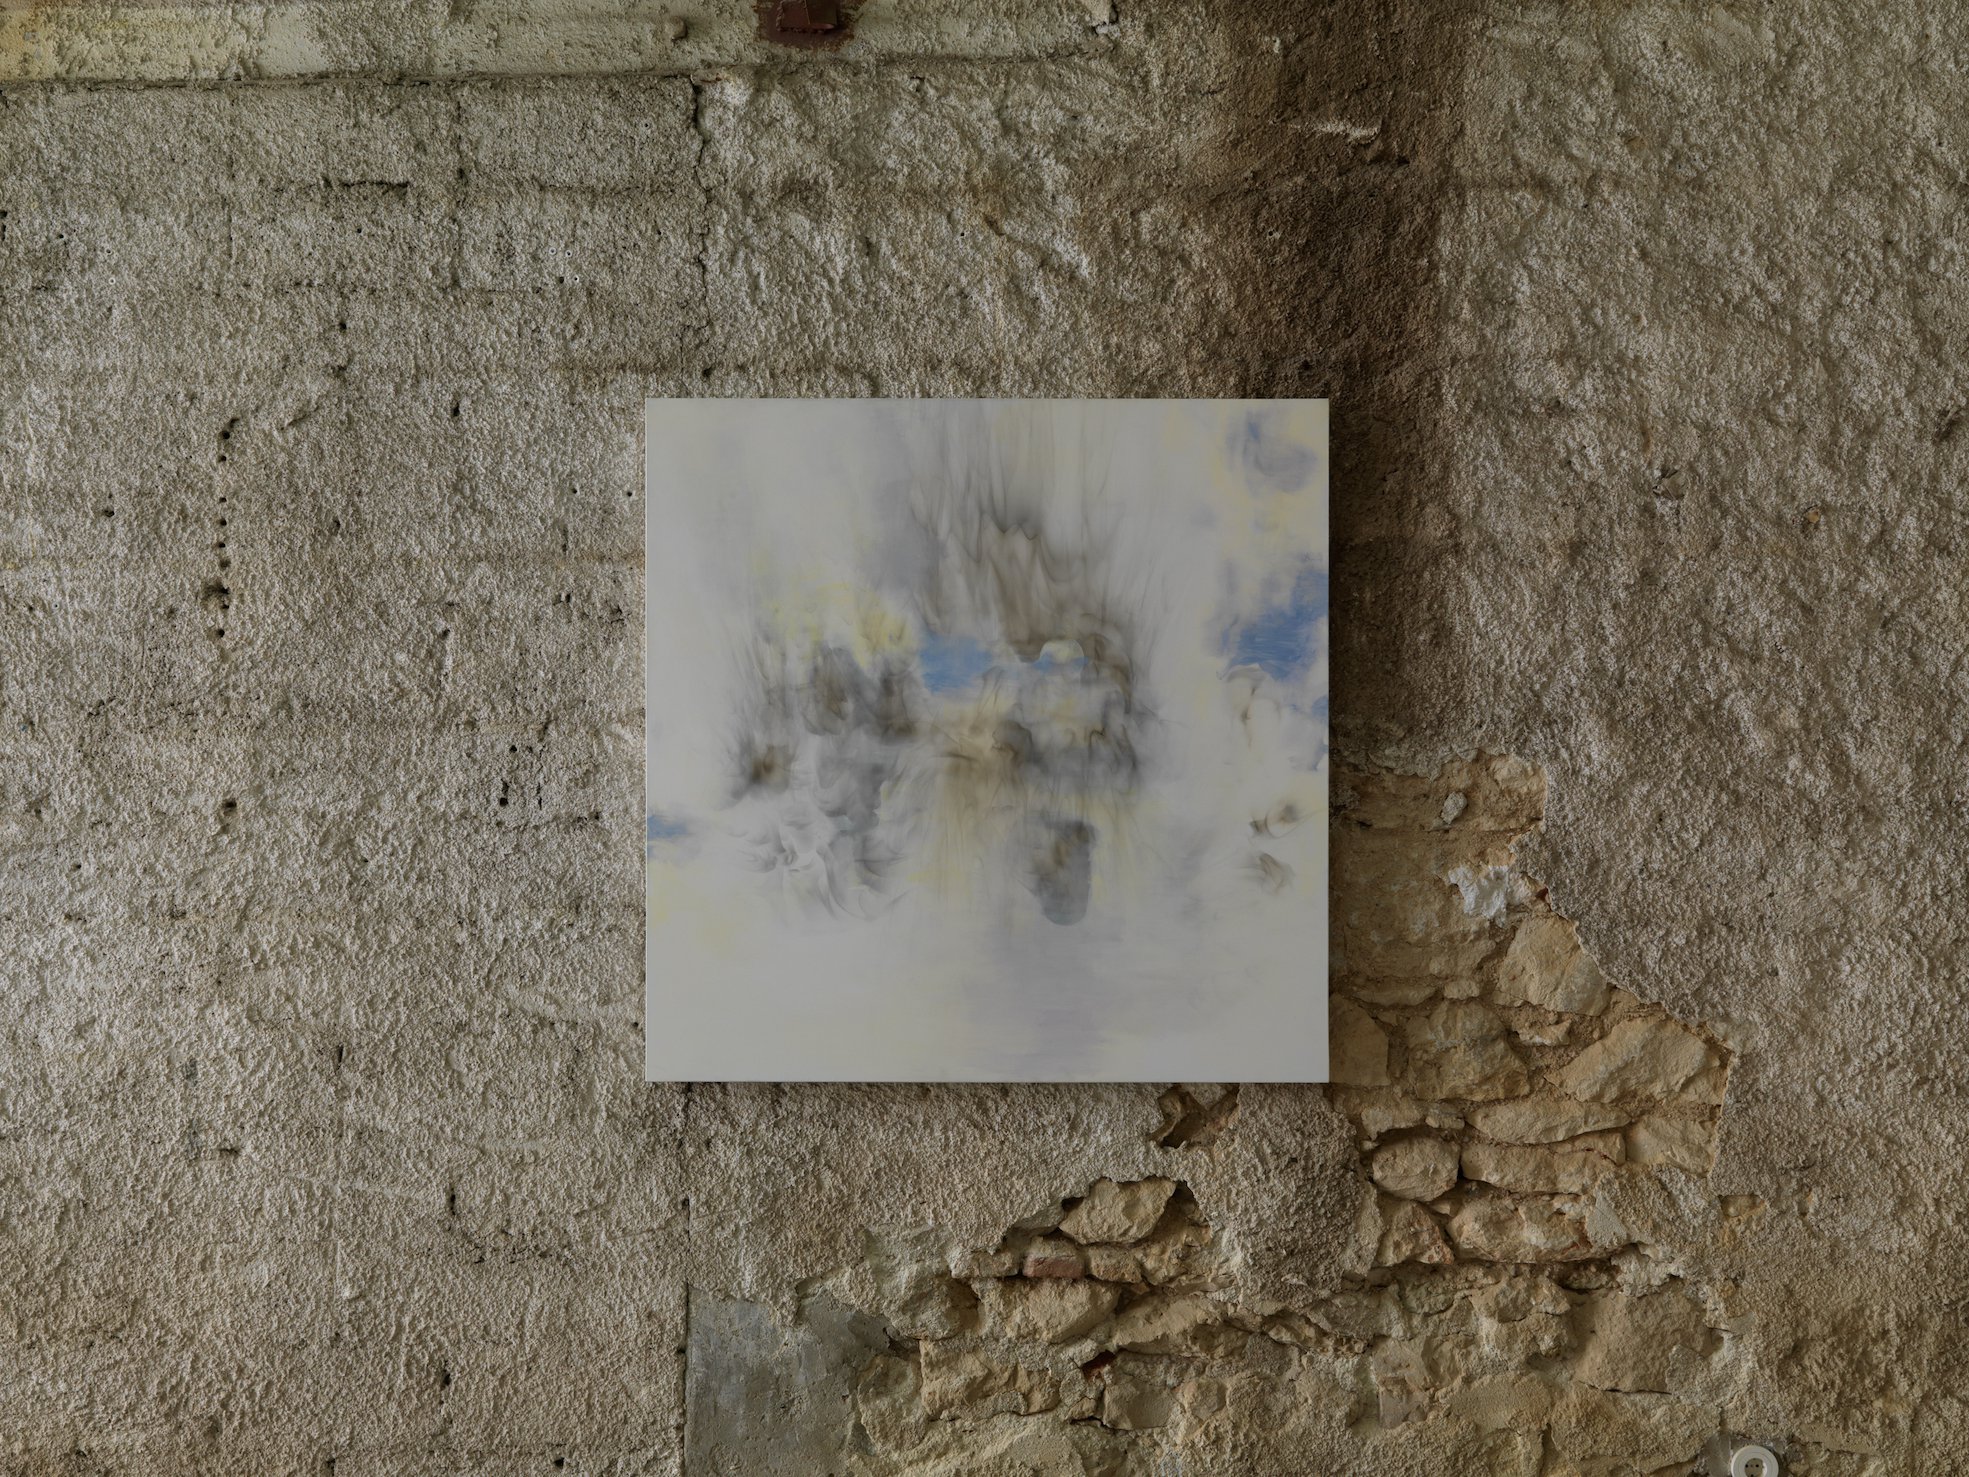 Eftihis Patsourakis, Untitled, oil, acrylic and smoke on canvas, 118 x 118 x 4 cm (46 1/2 x 46 1/2 x 1 5/8 in), 2022. Installation view, Ζωγραφική, Rodeo, Piraeus, 2023